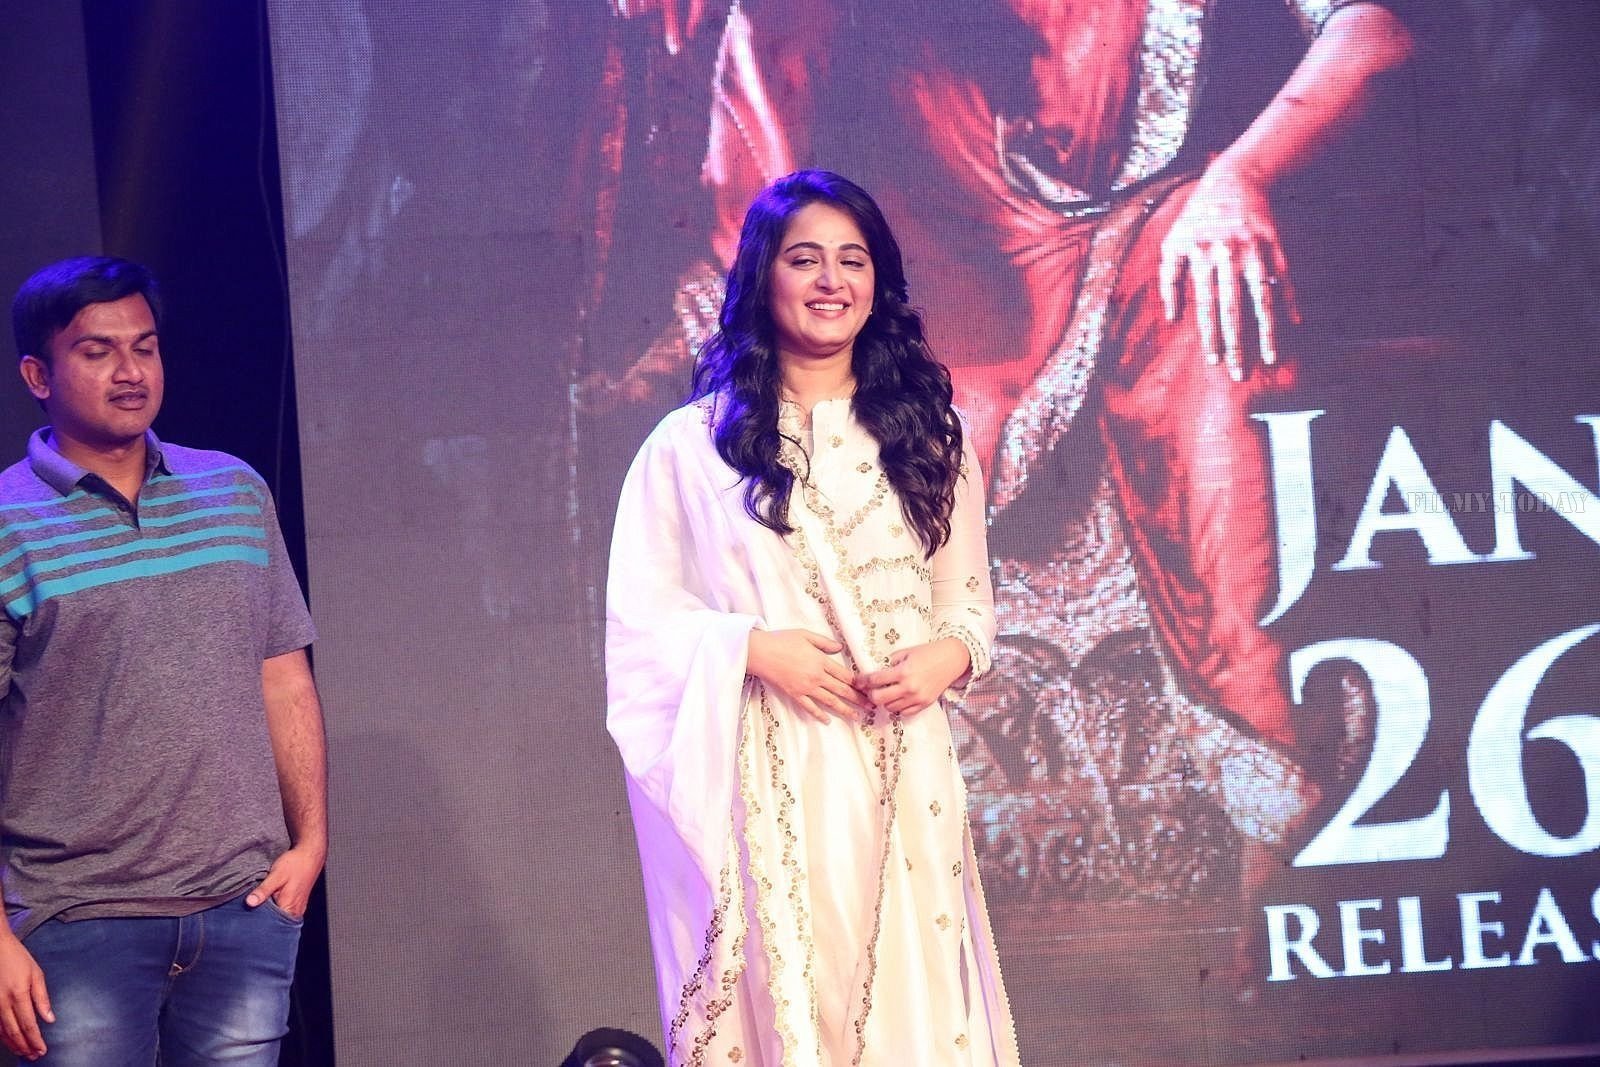 Bhaagamathie Pre Release Event Photos | Picture 1560401